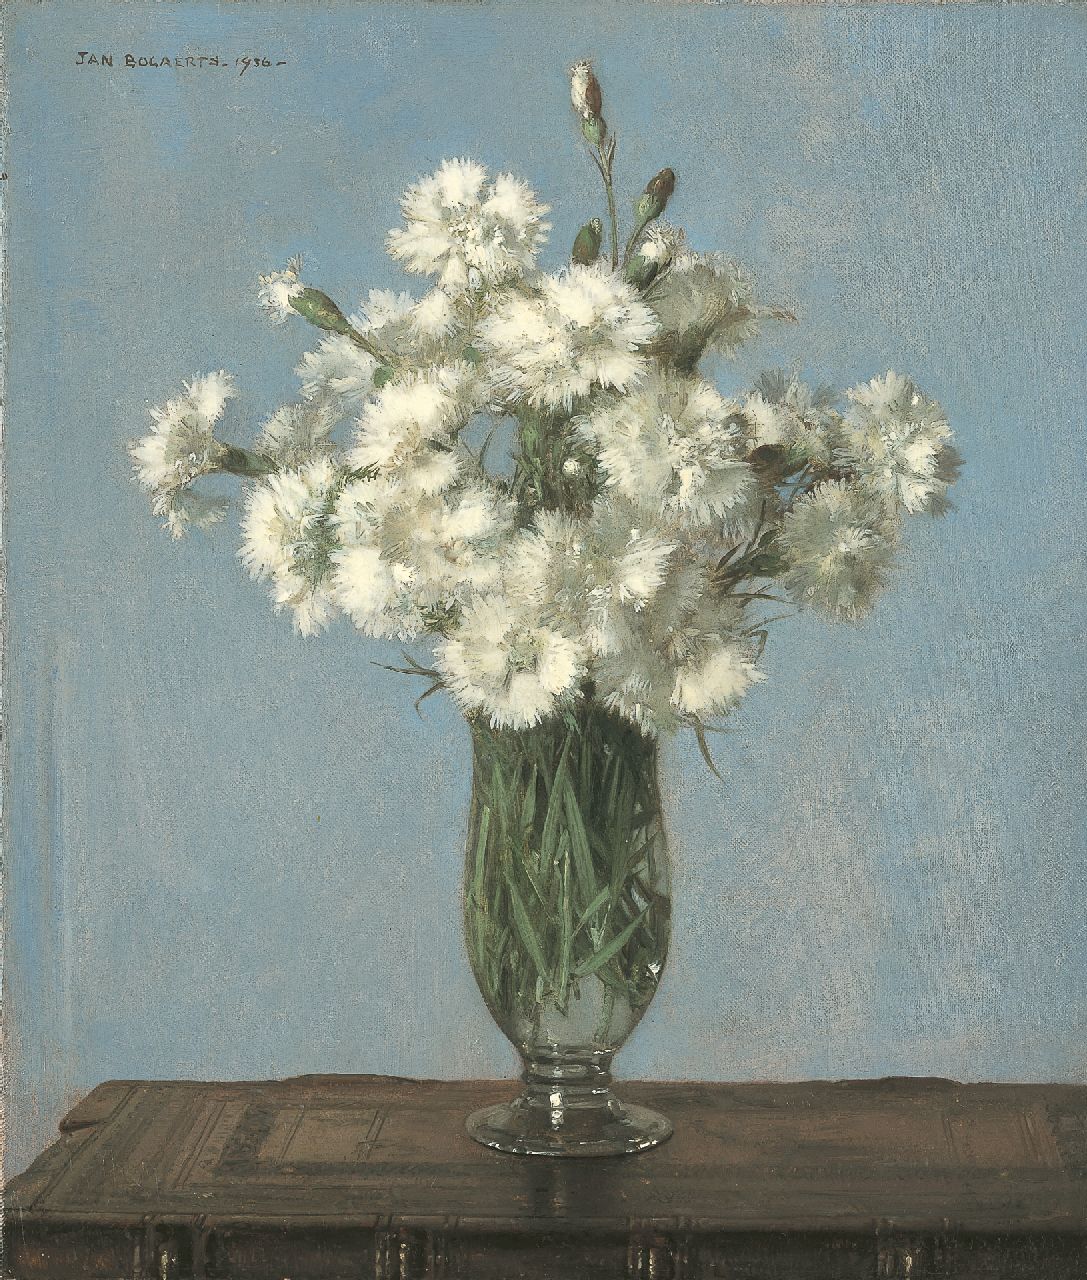 Bogaerts J.J.M.  | Johannes Jacobus Maria 'Jan' Bogaerts, White carnations in a glass vase, oil on canvas 35.2 x 30.2 cm, signed u.l. and dated 1936